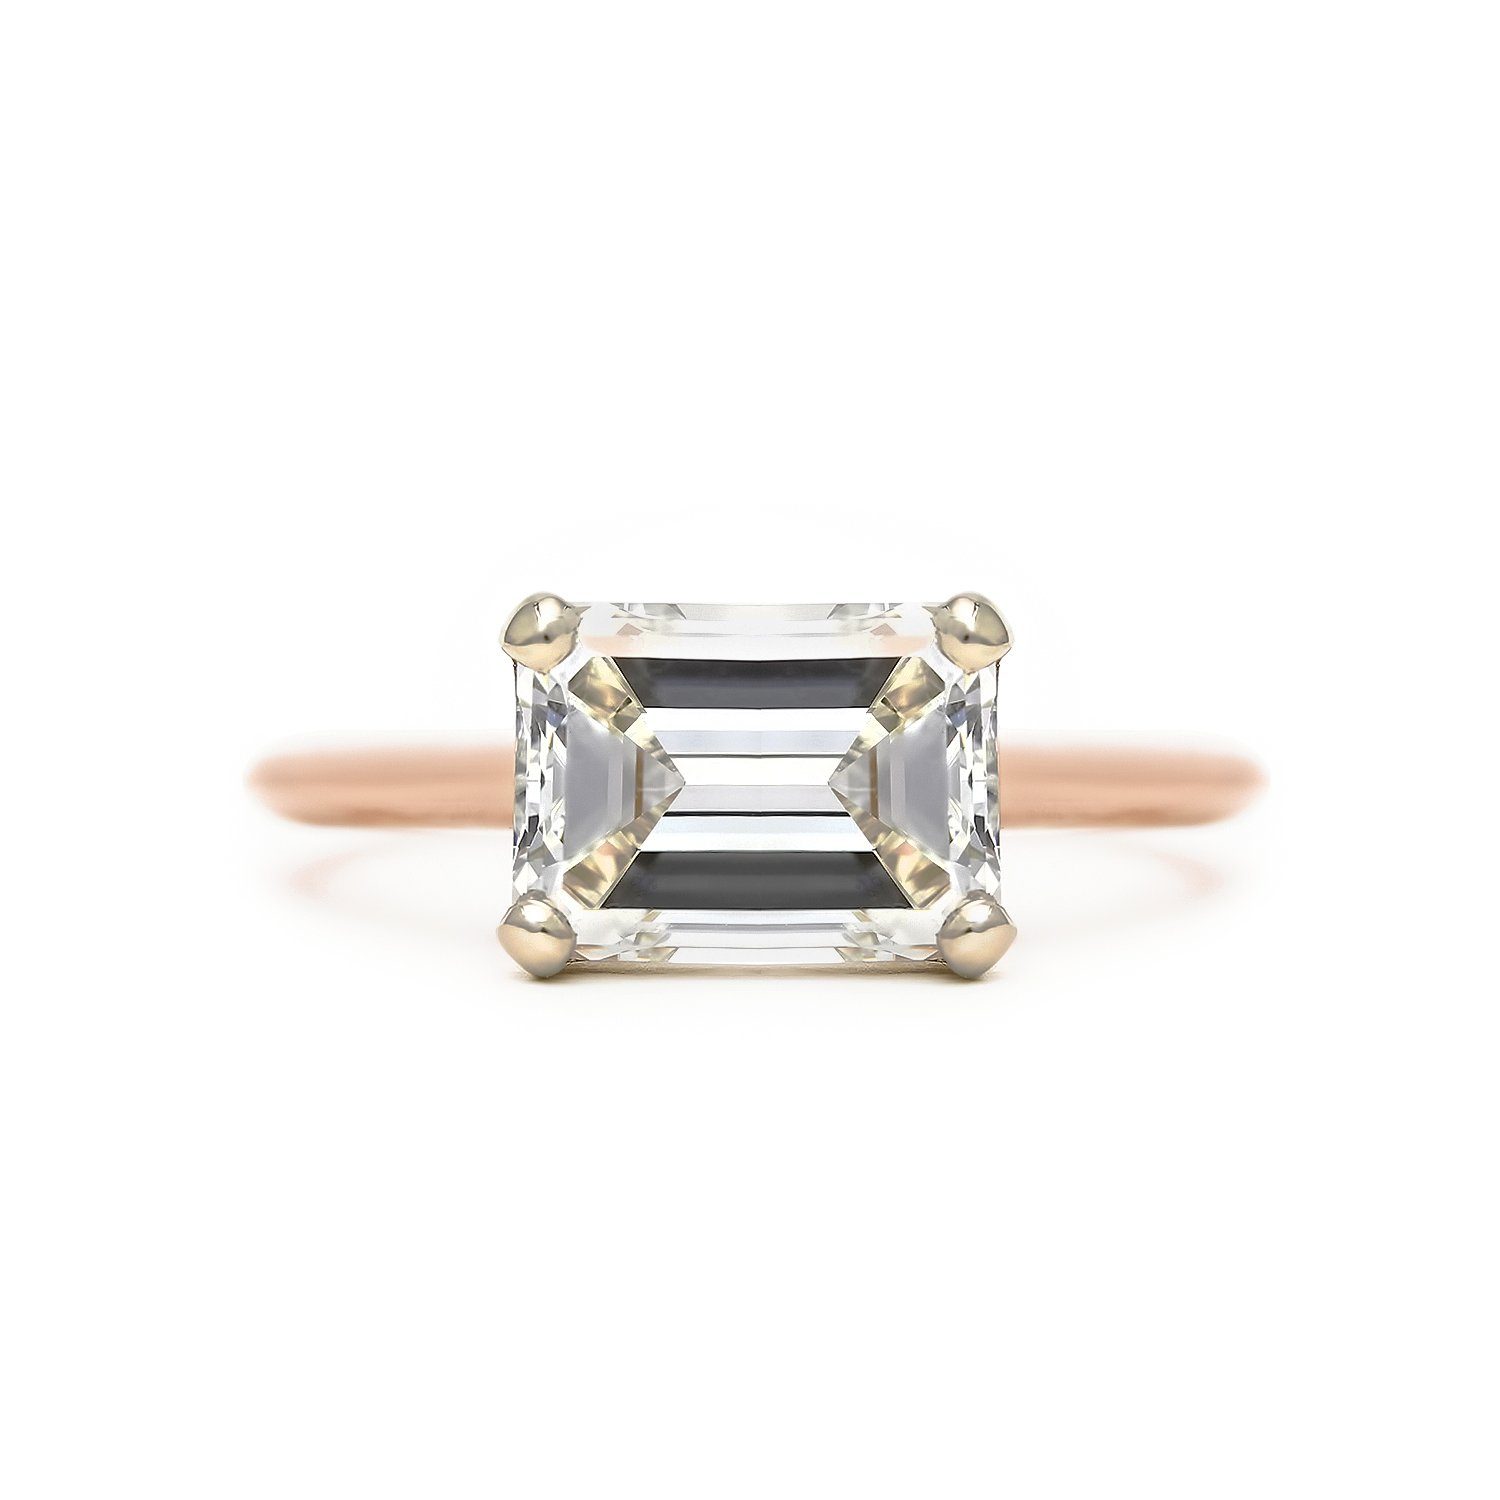 Emerald cut diamond solitaire east west engagement ring